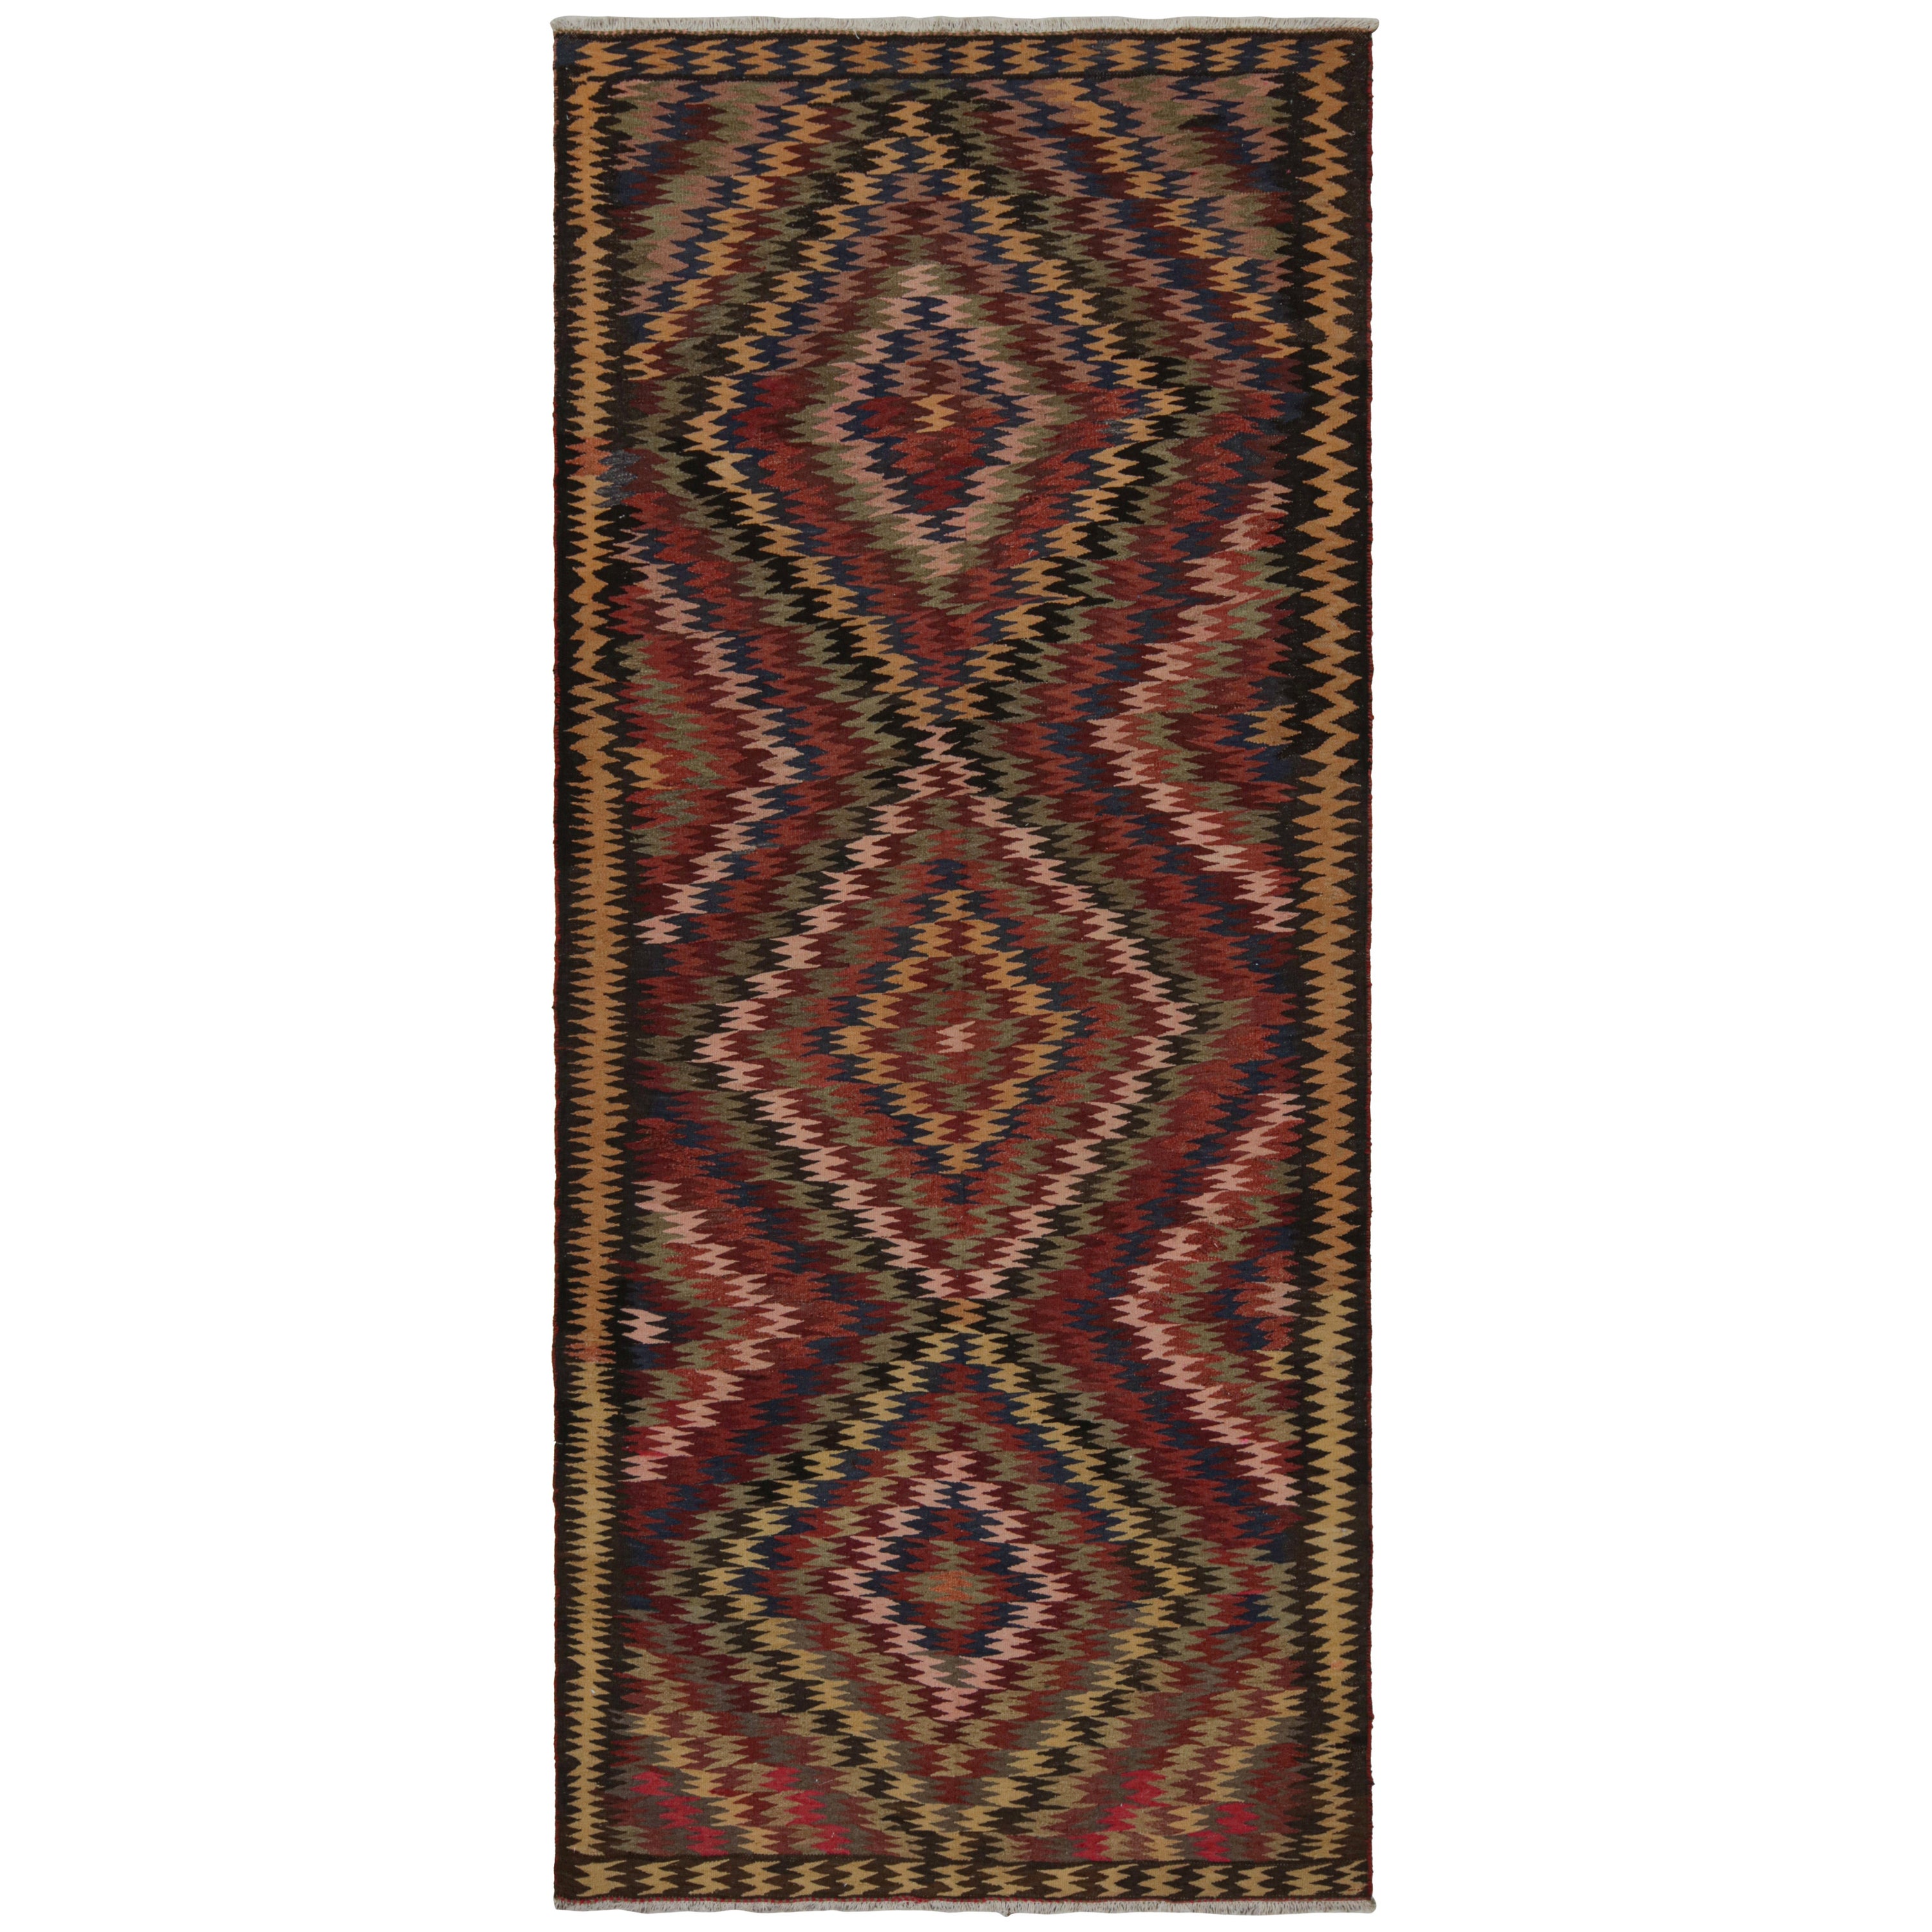 Vintage Persian Kilim in Polychromatic Patterns, from Rug & Kilim